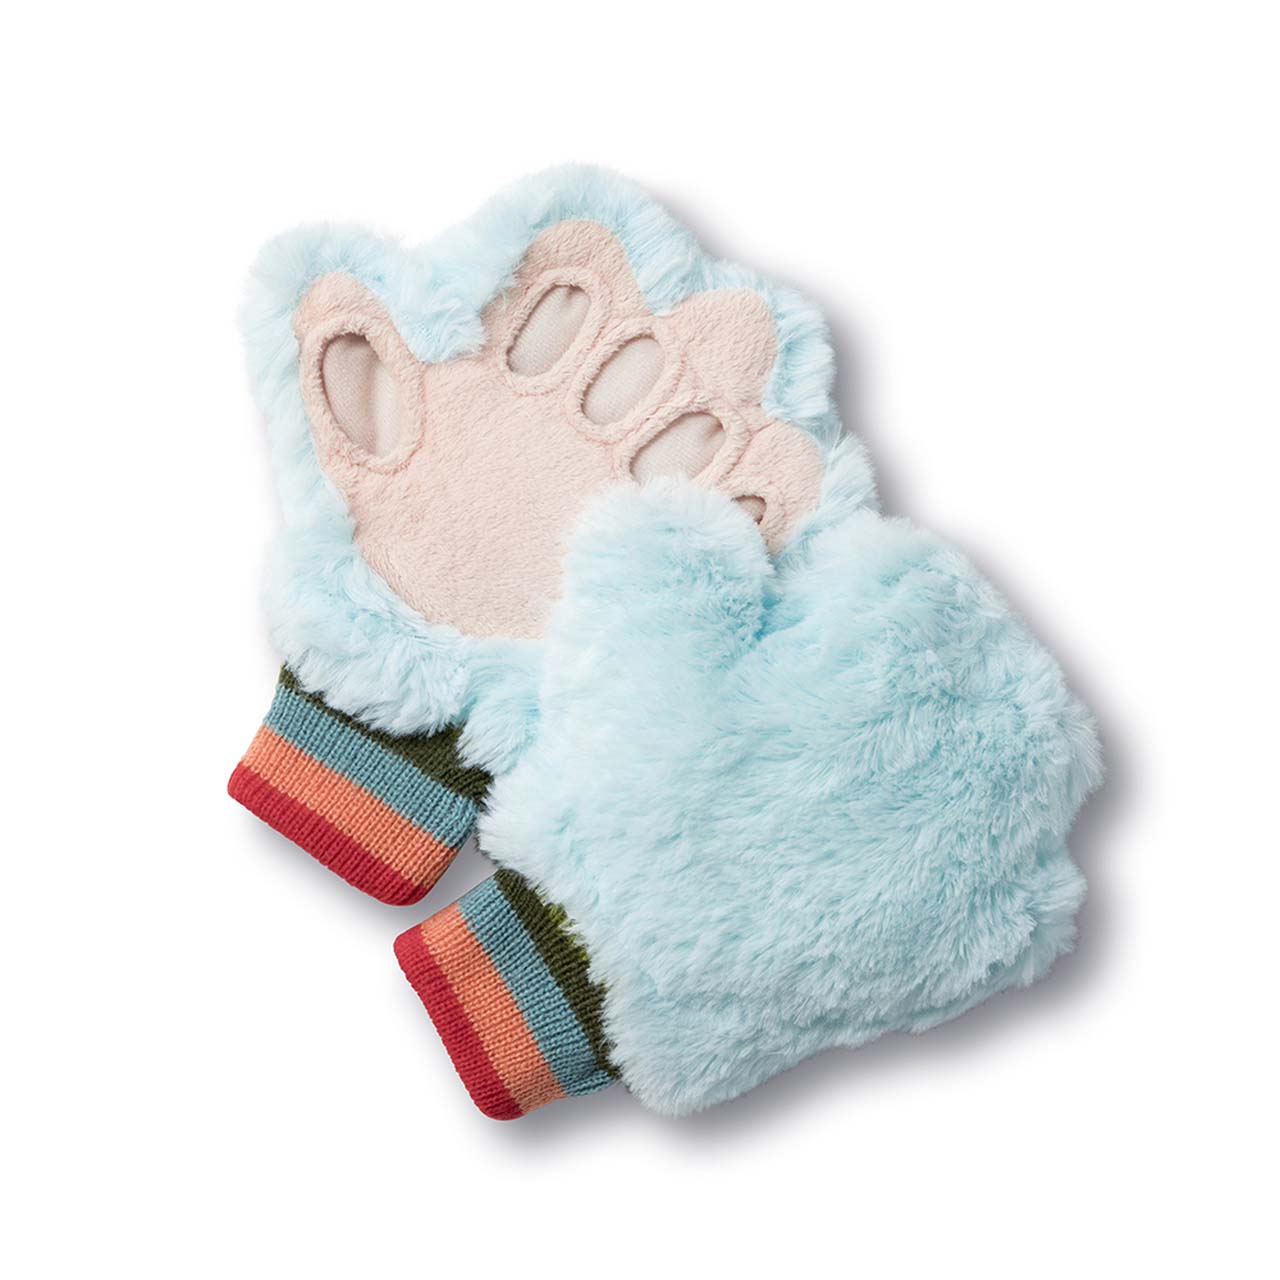 Tickle Monster Plush Mitts